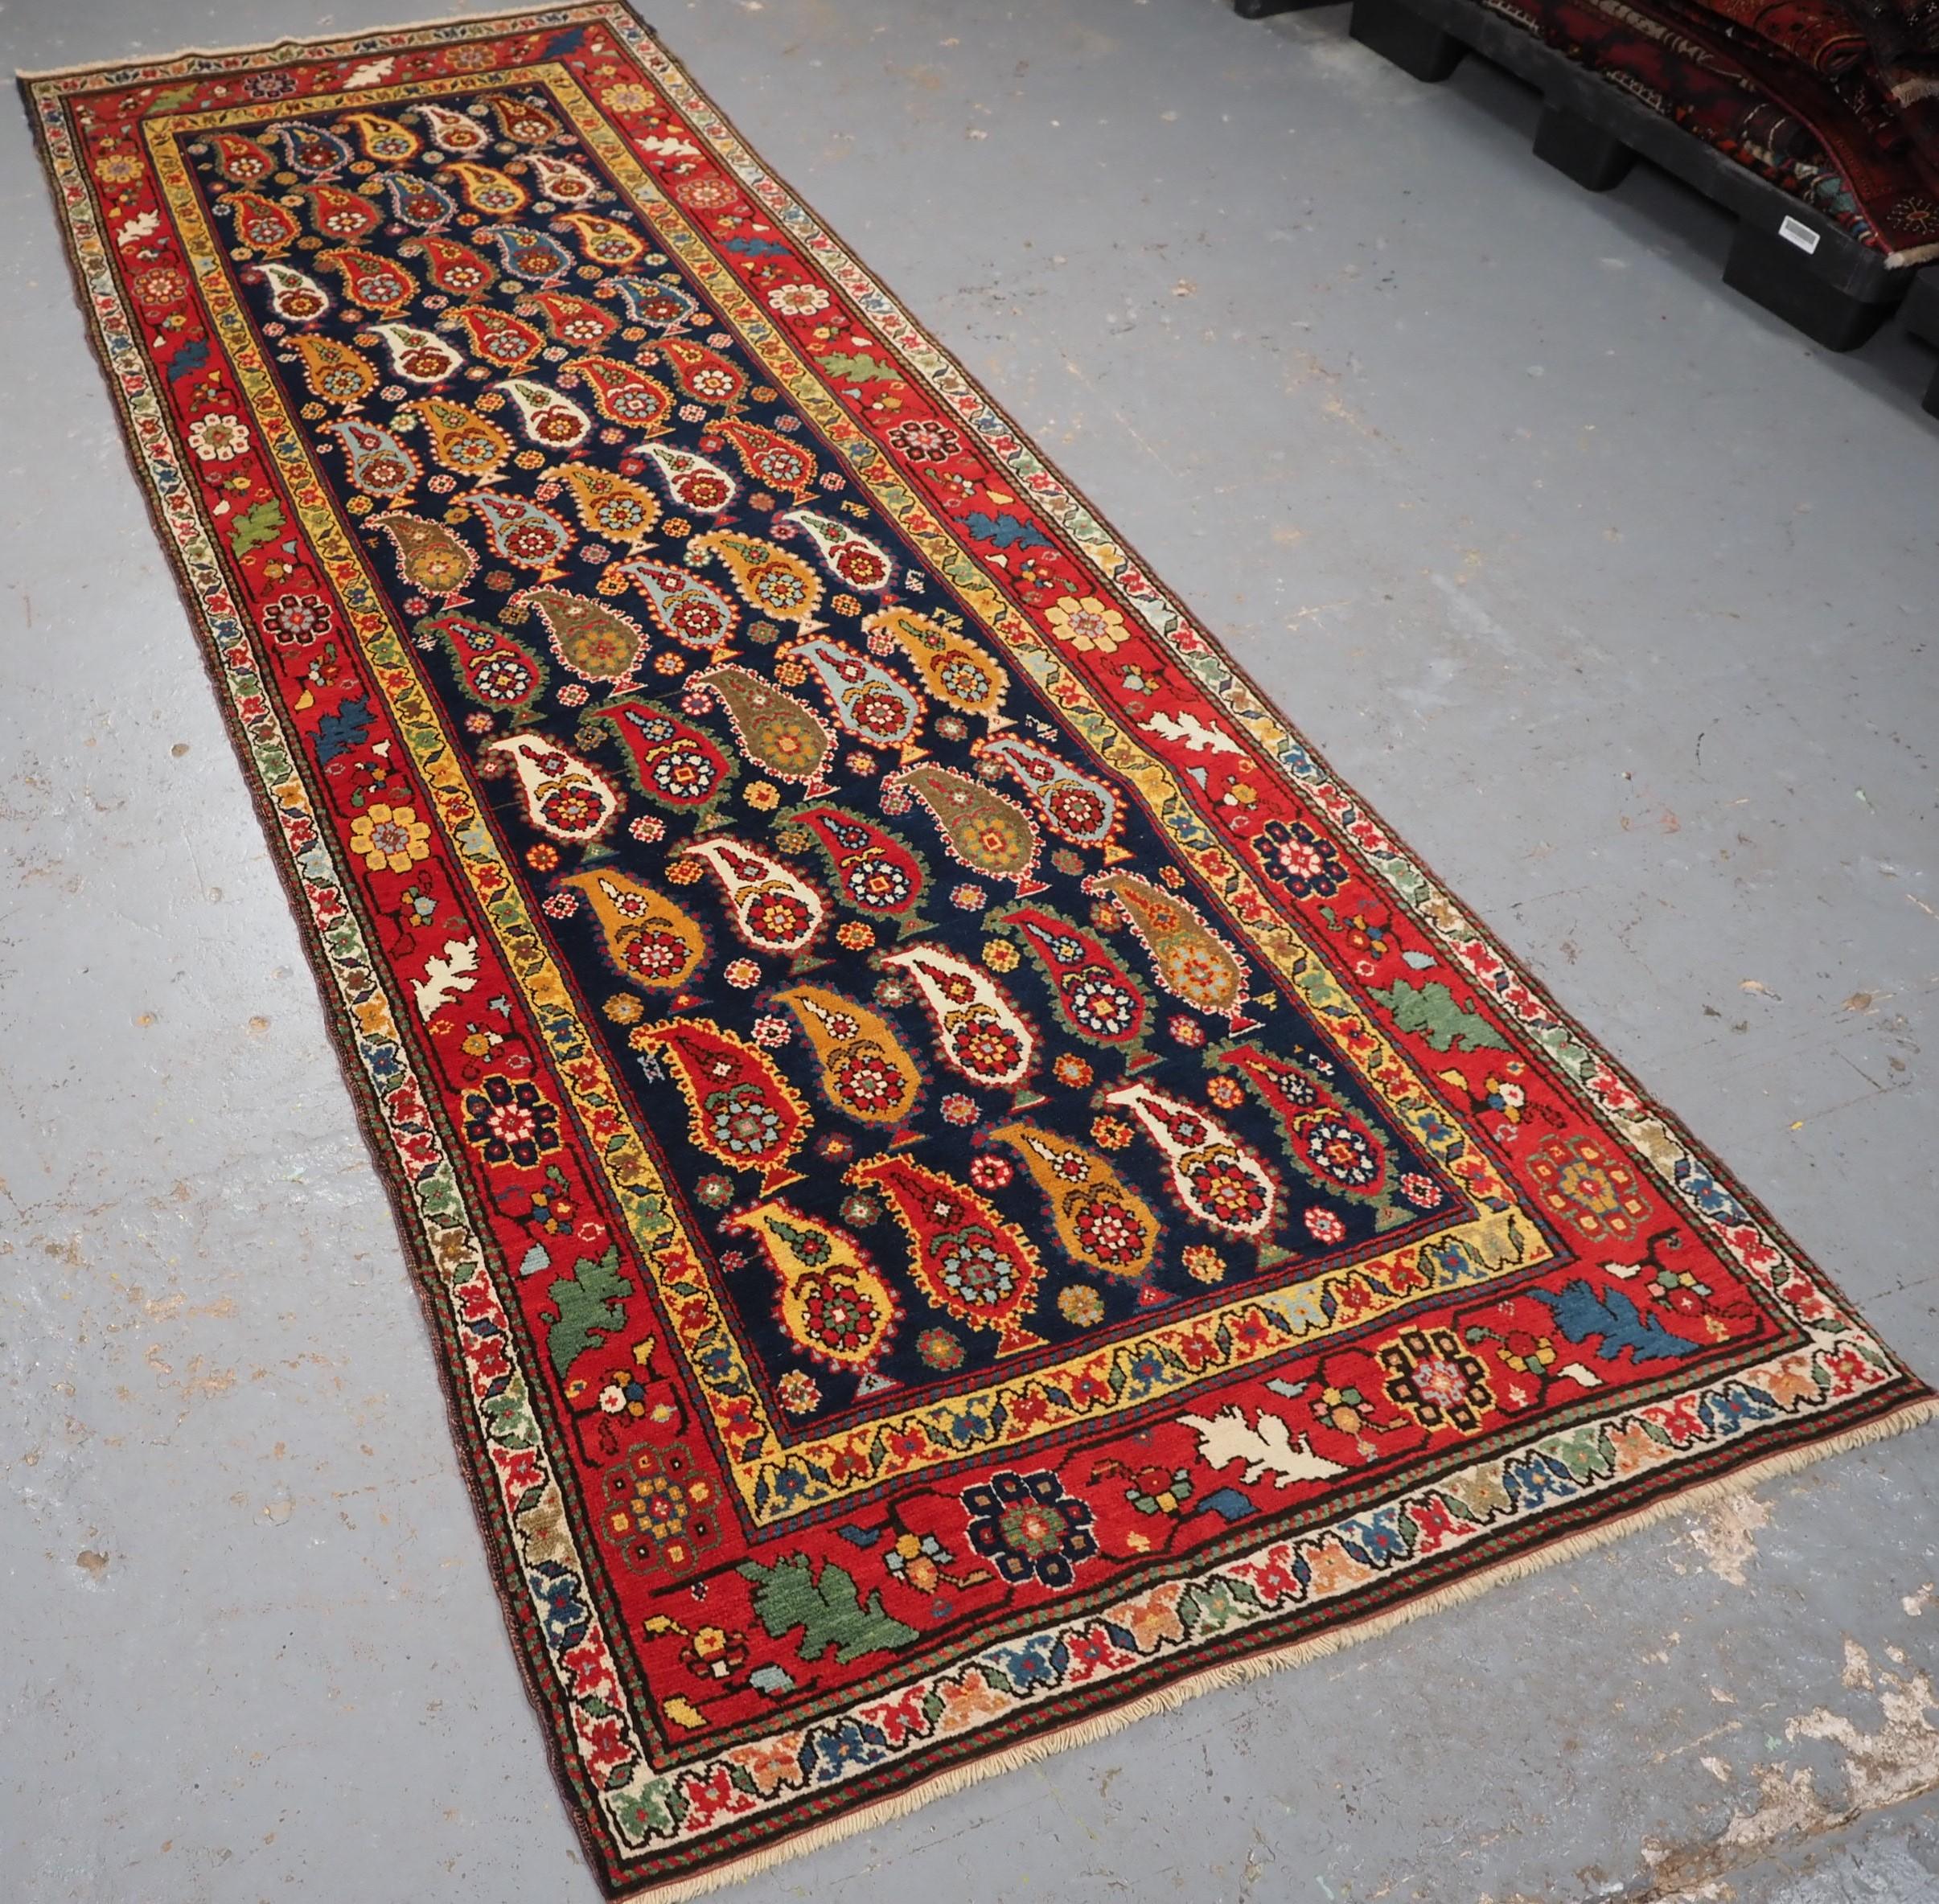 Size: 9ft 7in x 3ft 6in (292 x 106cm).

Antique Caucasian Karabagh region long rug with all over boteh design.

Circa 1900.

A superb example of a Caucasian long rug, with the most amazing colour palette. The large floral boteh stand out against the